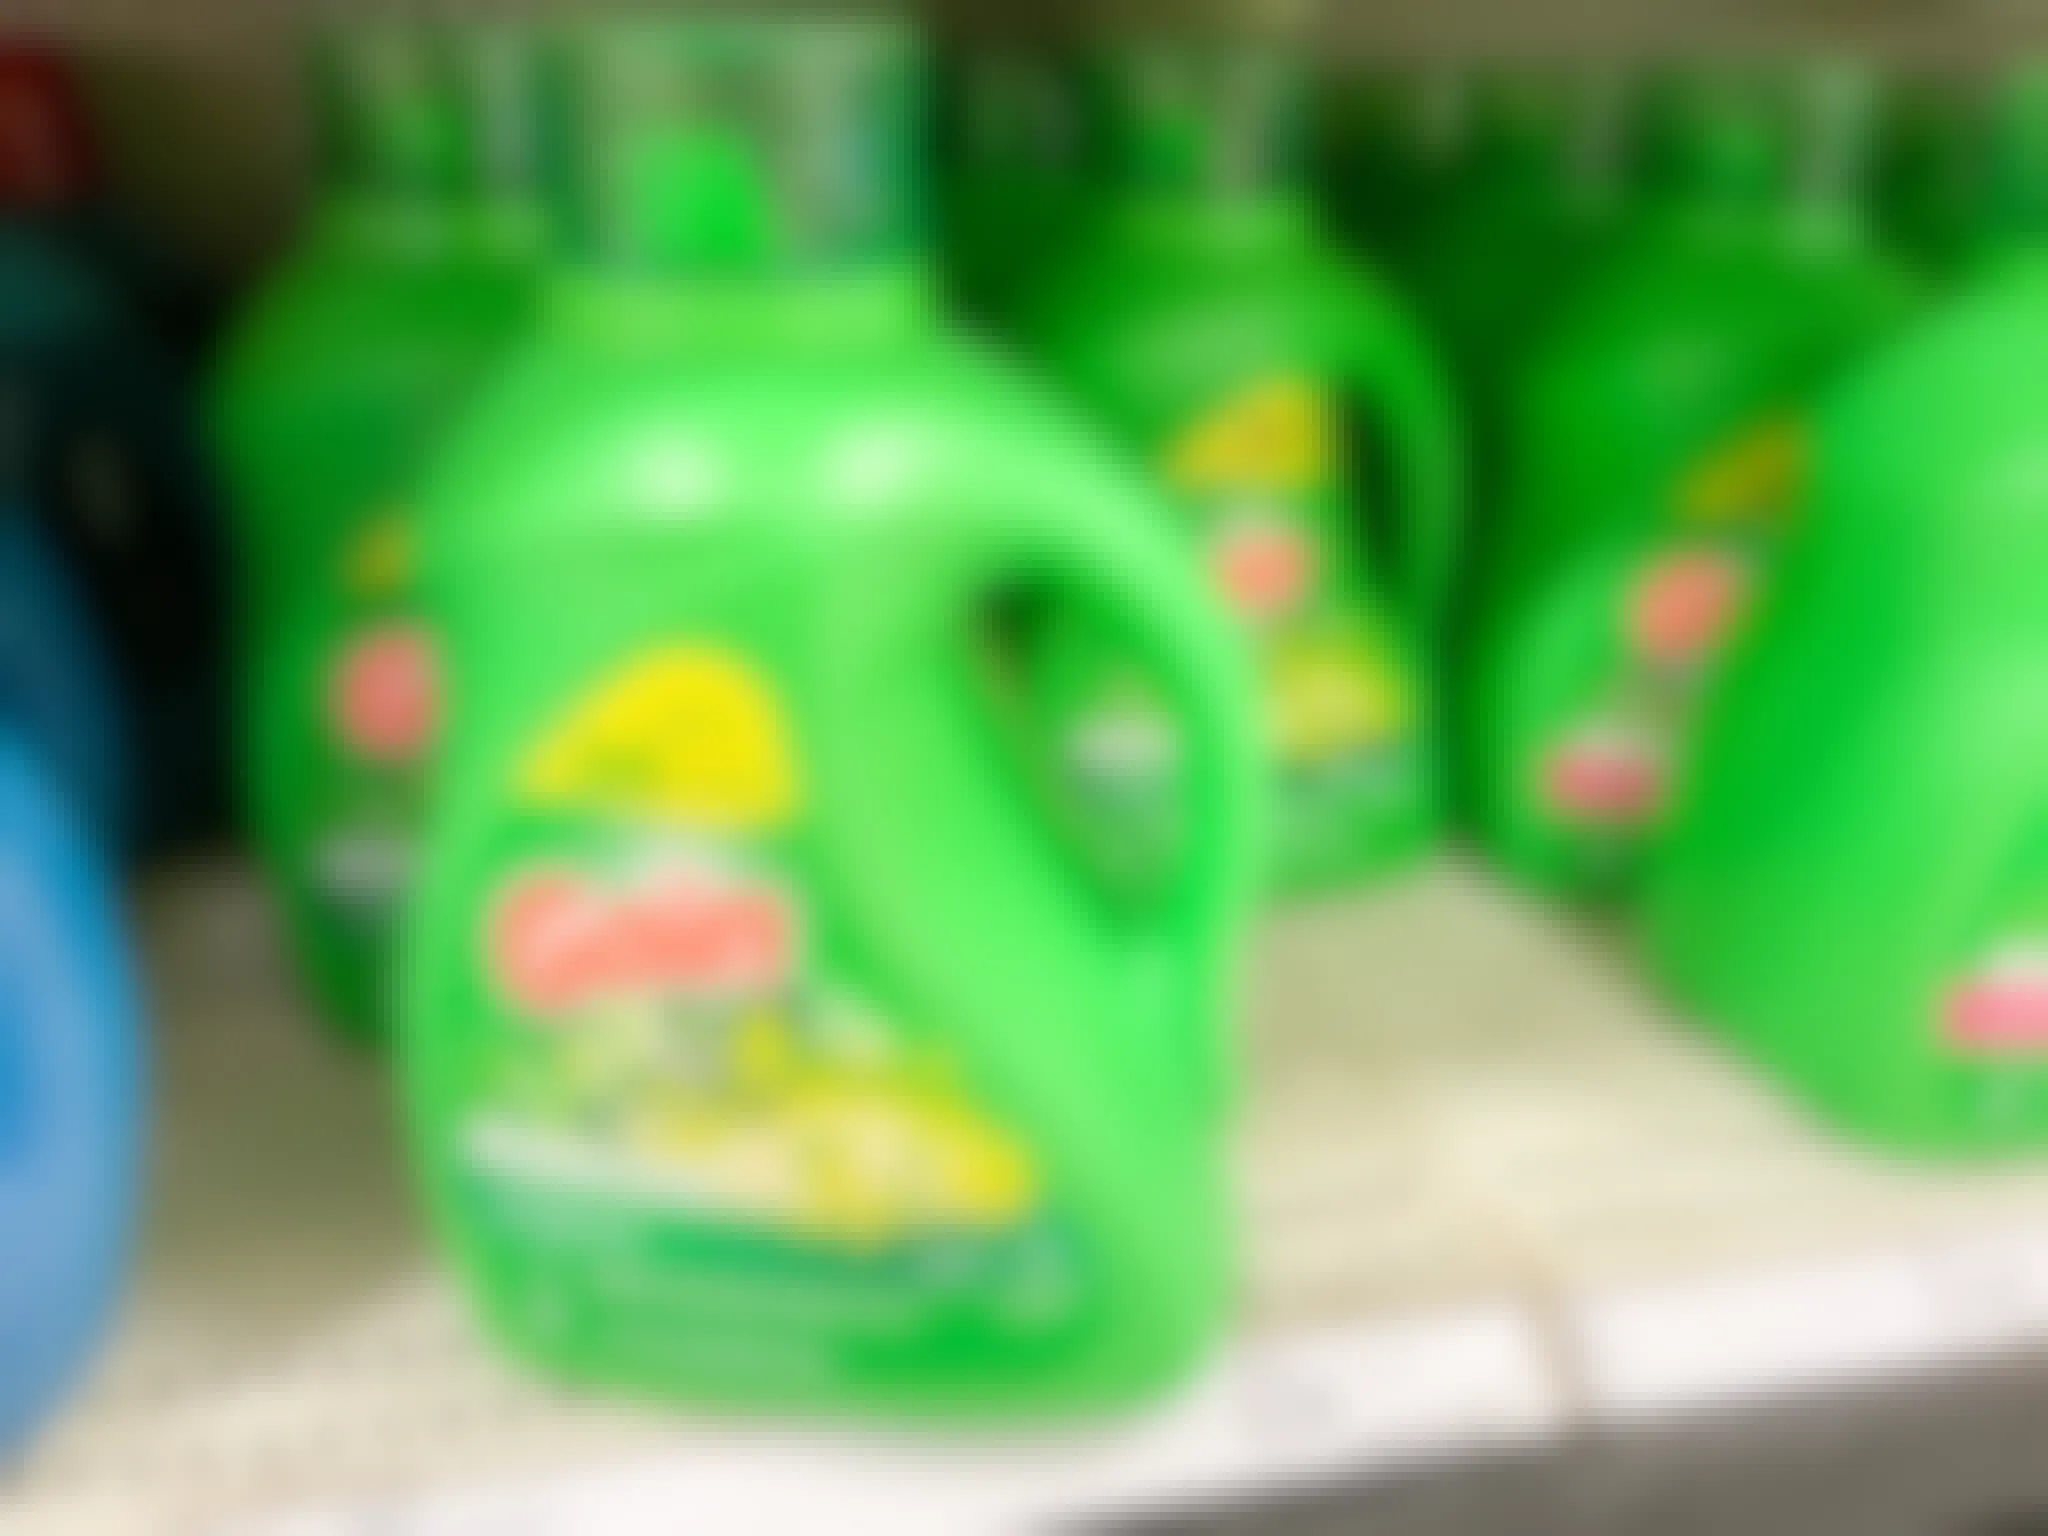 113 ounce bottle of gain laundry detergent